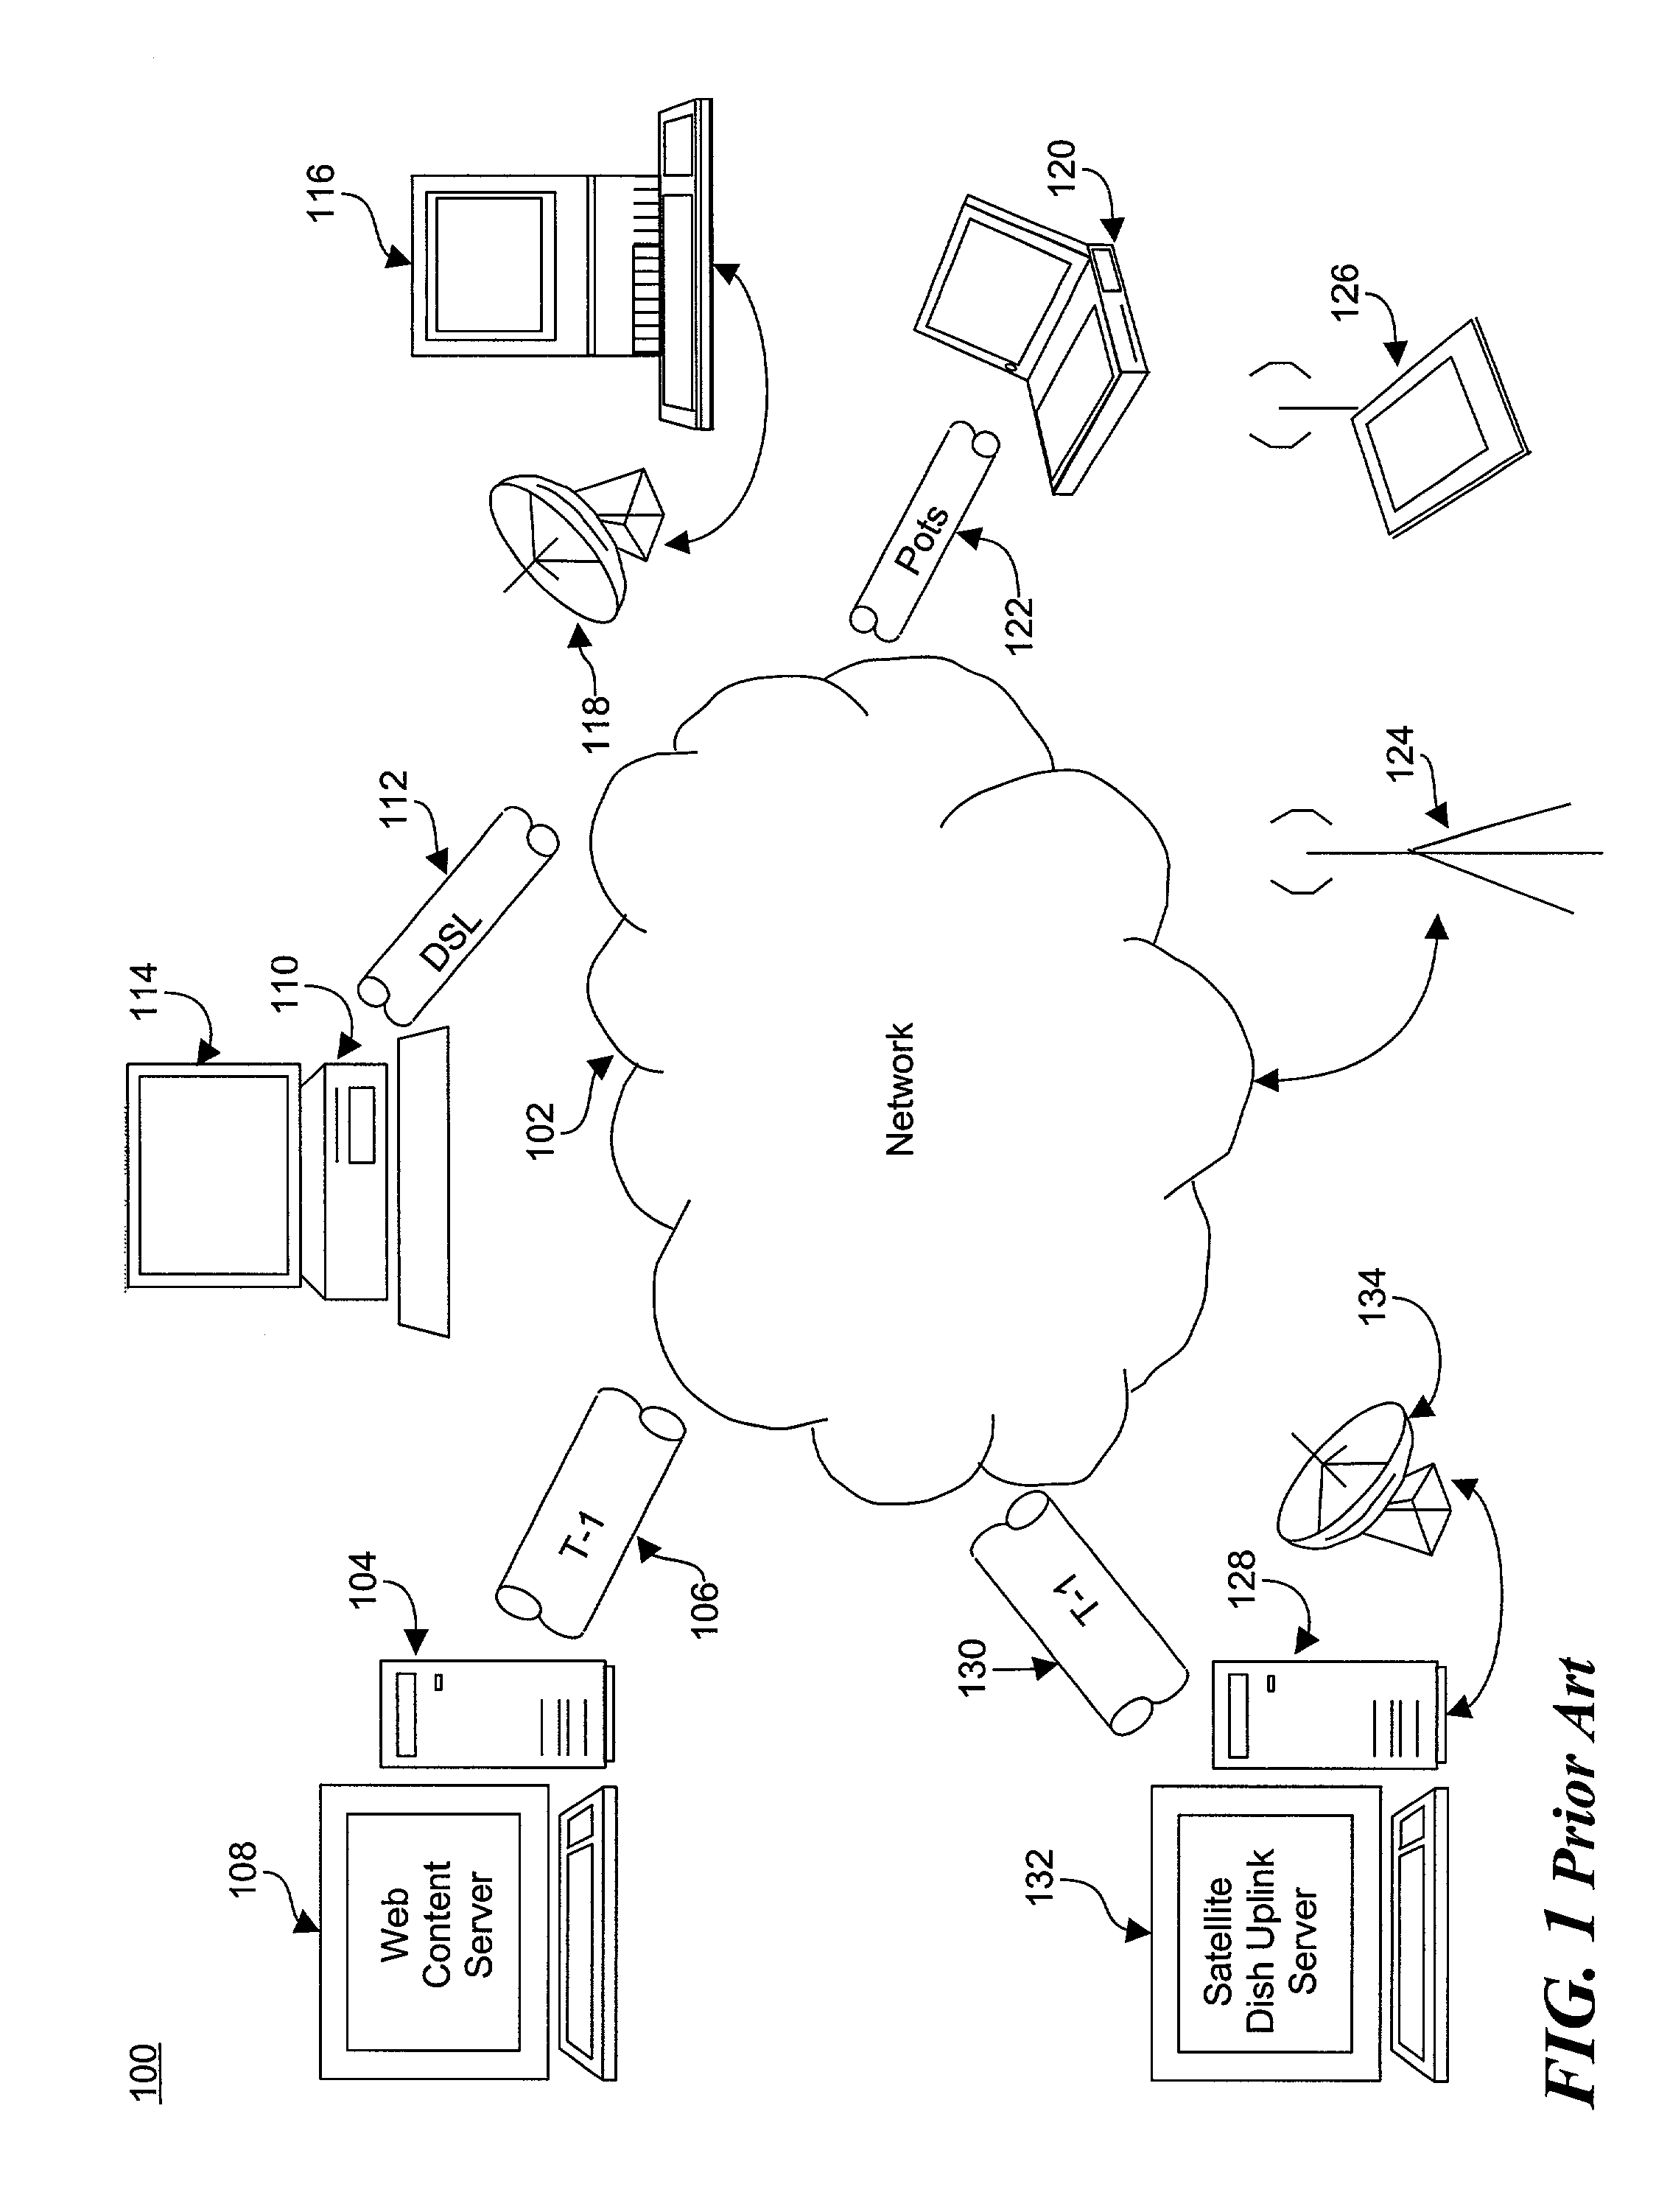 System and method for adaptive formatting of image information for efficient delivery and presentation